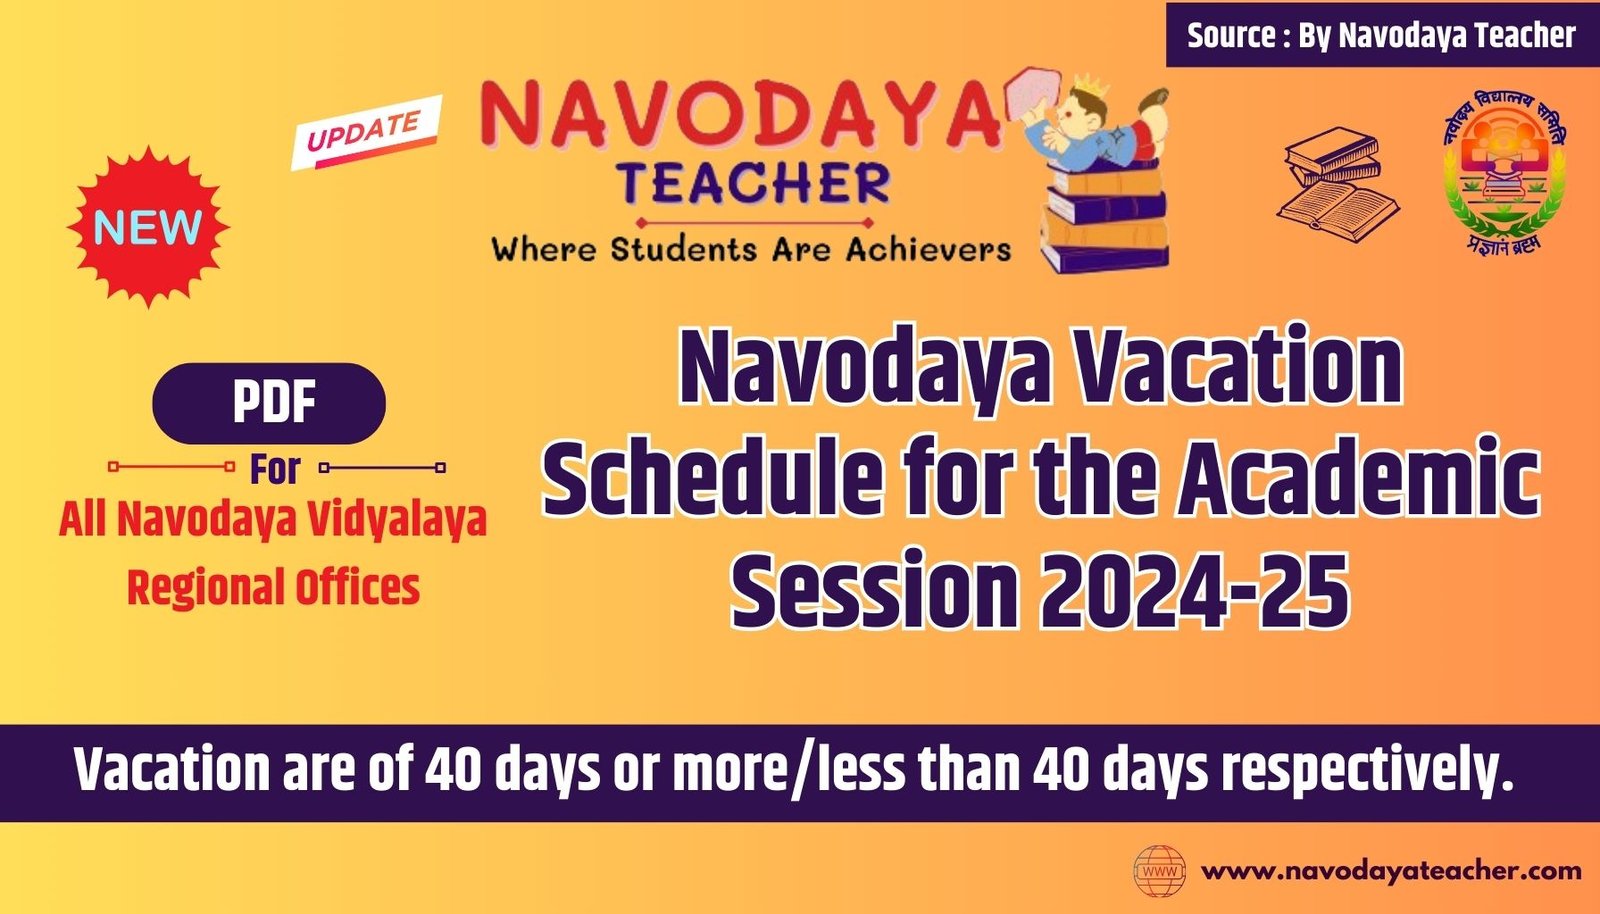 Navodaya Vacation Schedule for the Academic Session 2024-25